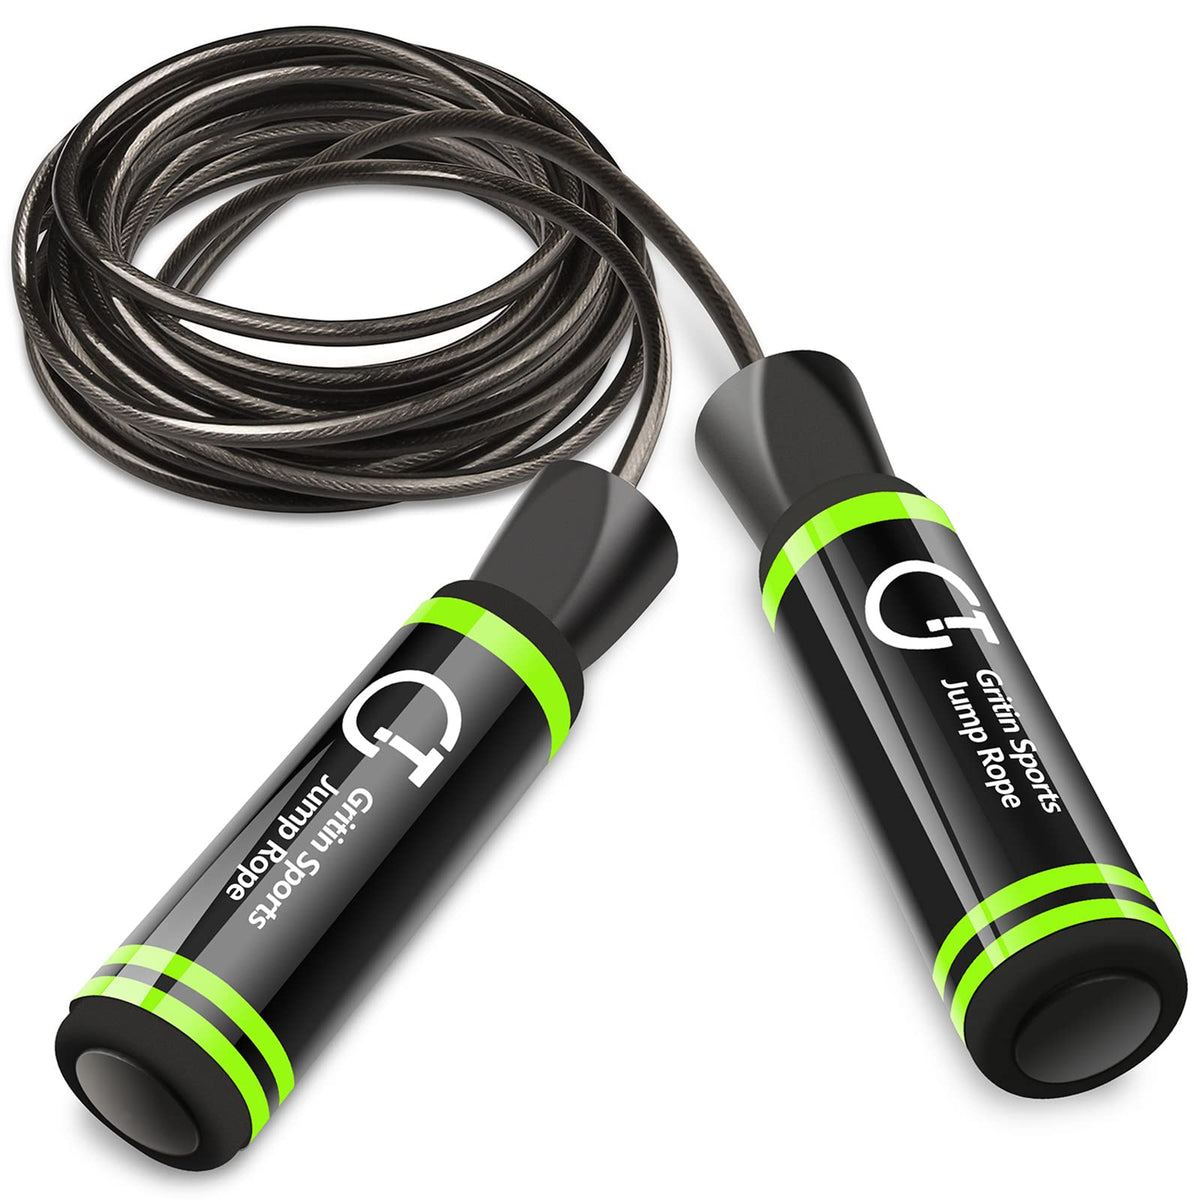 Gritin Skipping Rope, Speed Jump Rope Soft Memory Foam Handle Tangle-free Adjustable Rope&Rapid Ball Bearings Fitness Workouts Fat Burning Exercises Boxing for Adults, Kids - Length Adjuster Included.